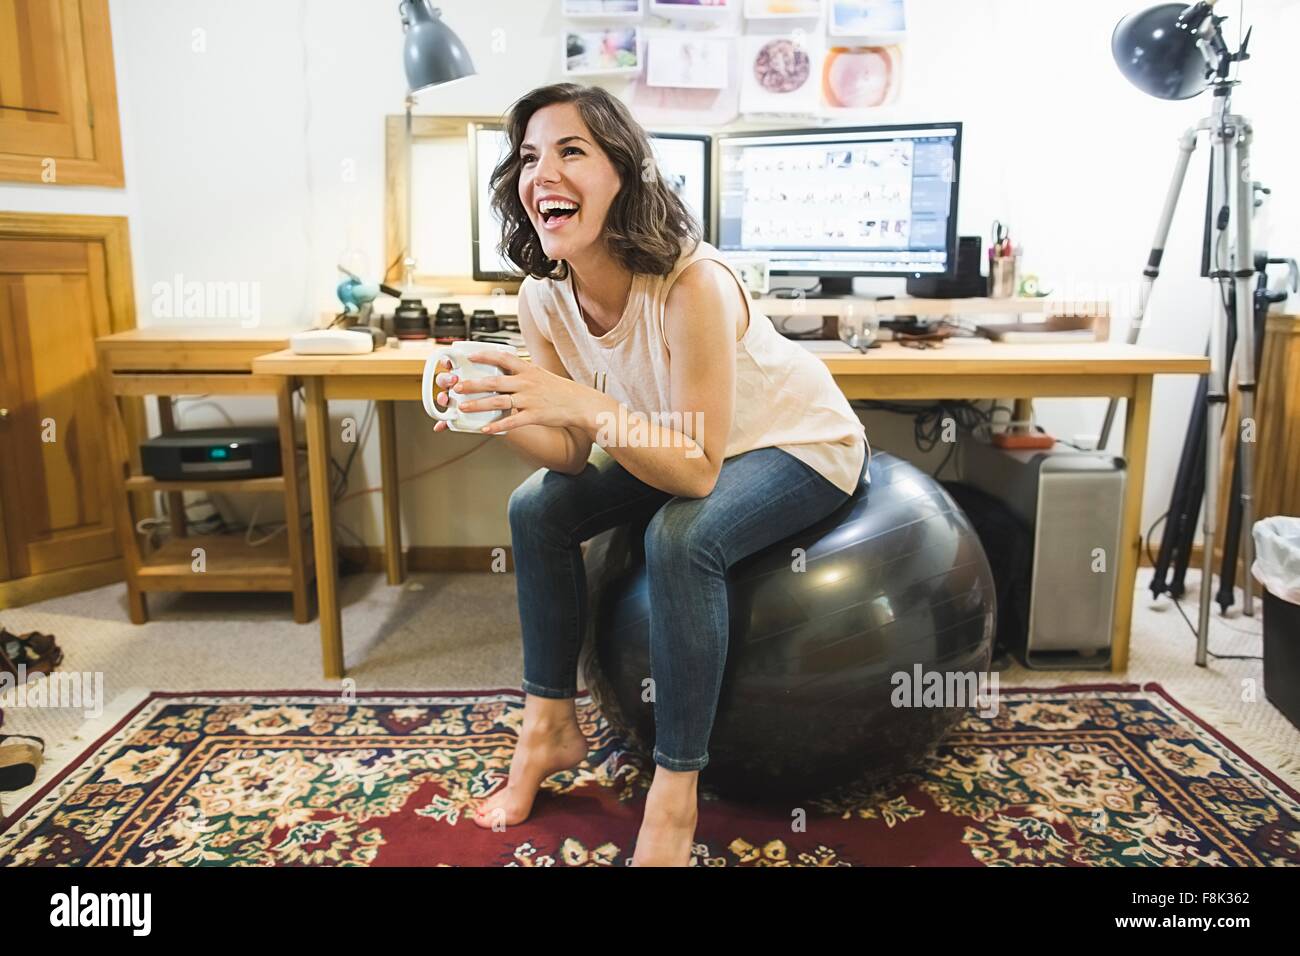 Mid adult woman sitting on yoga ball, holding coffee cup Stock Photo